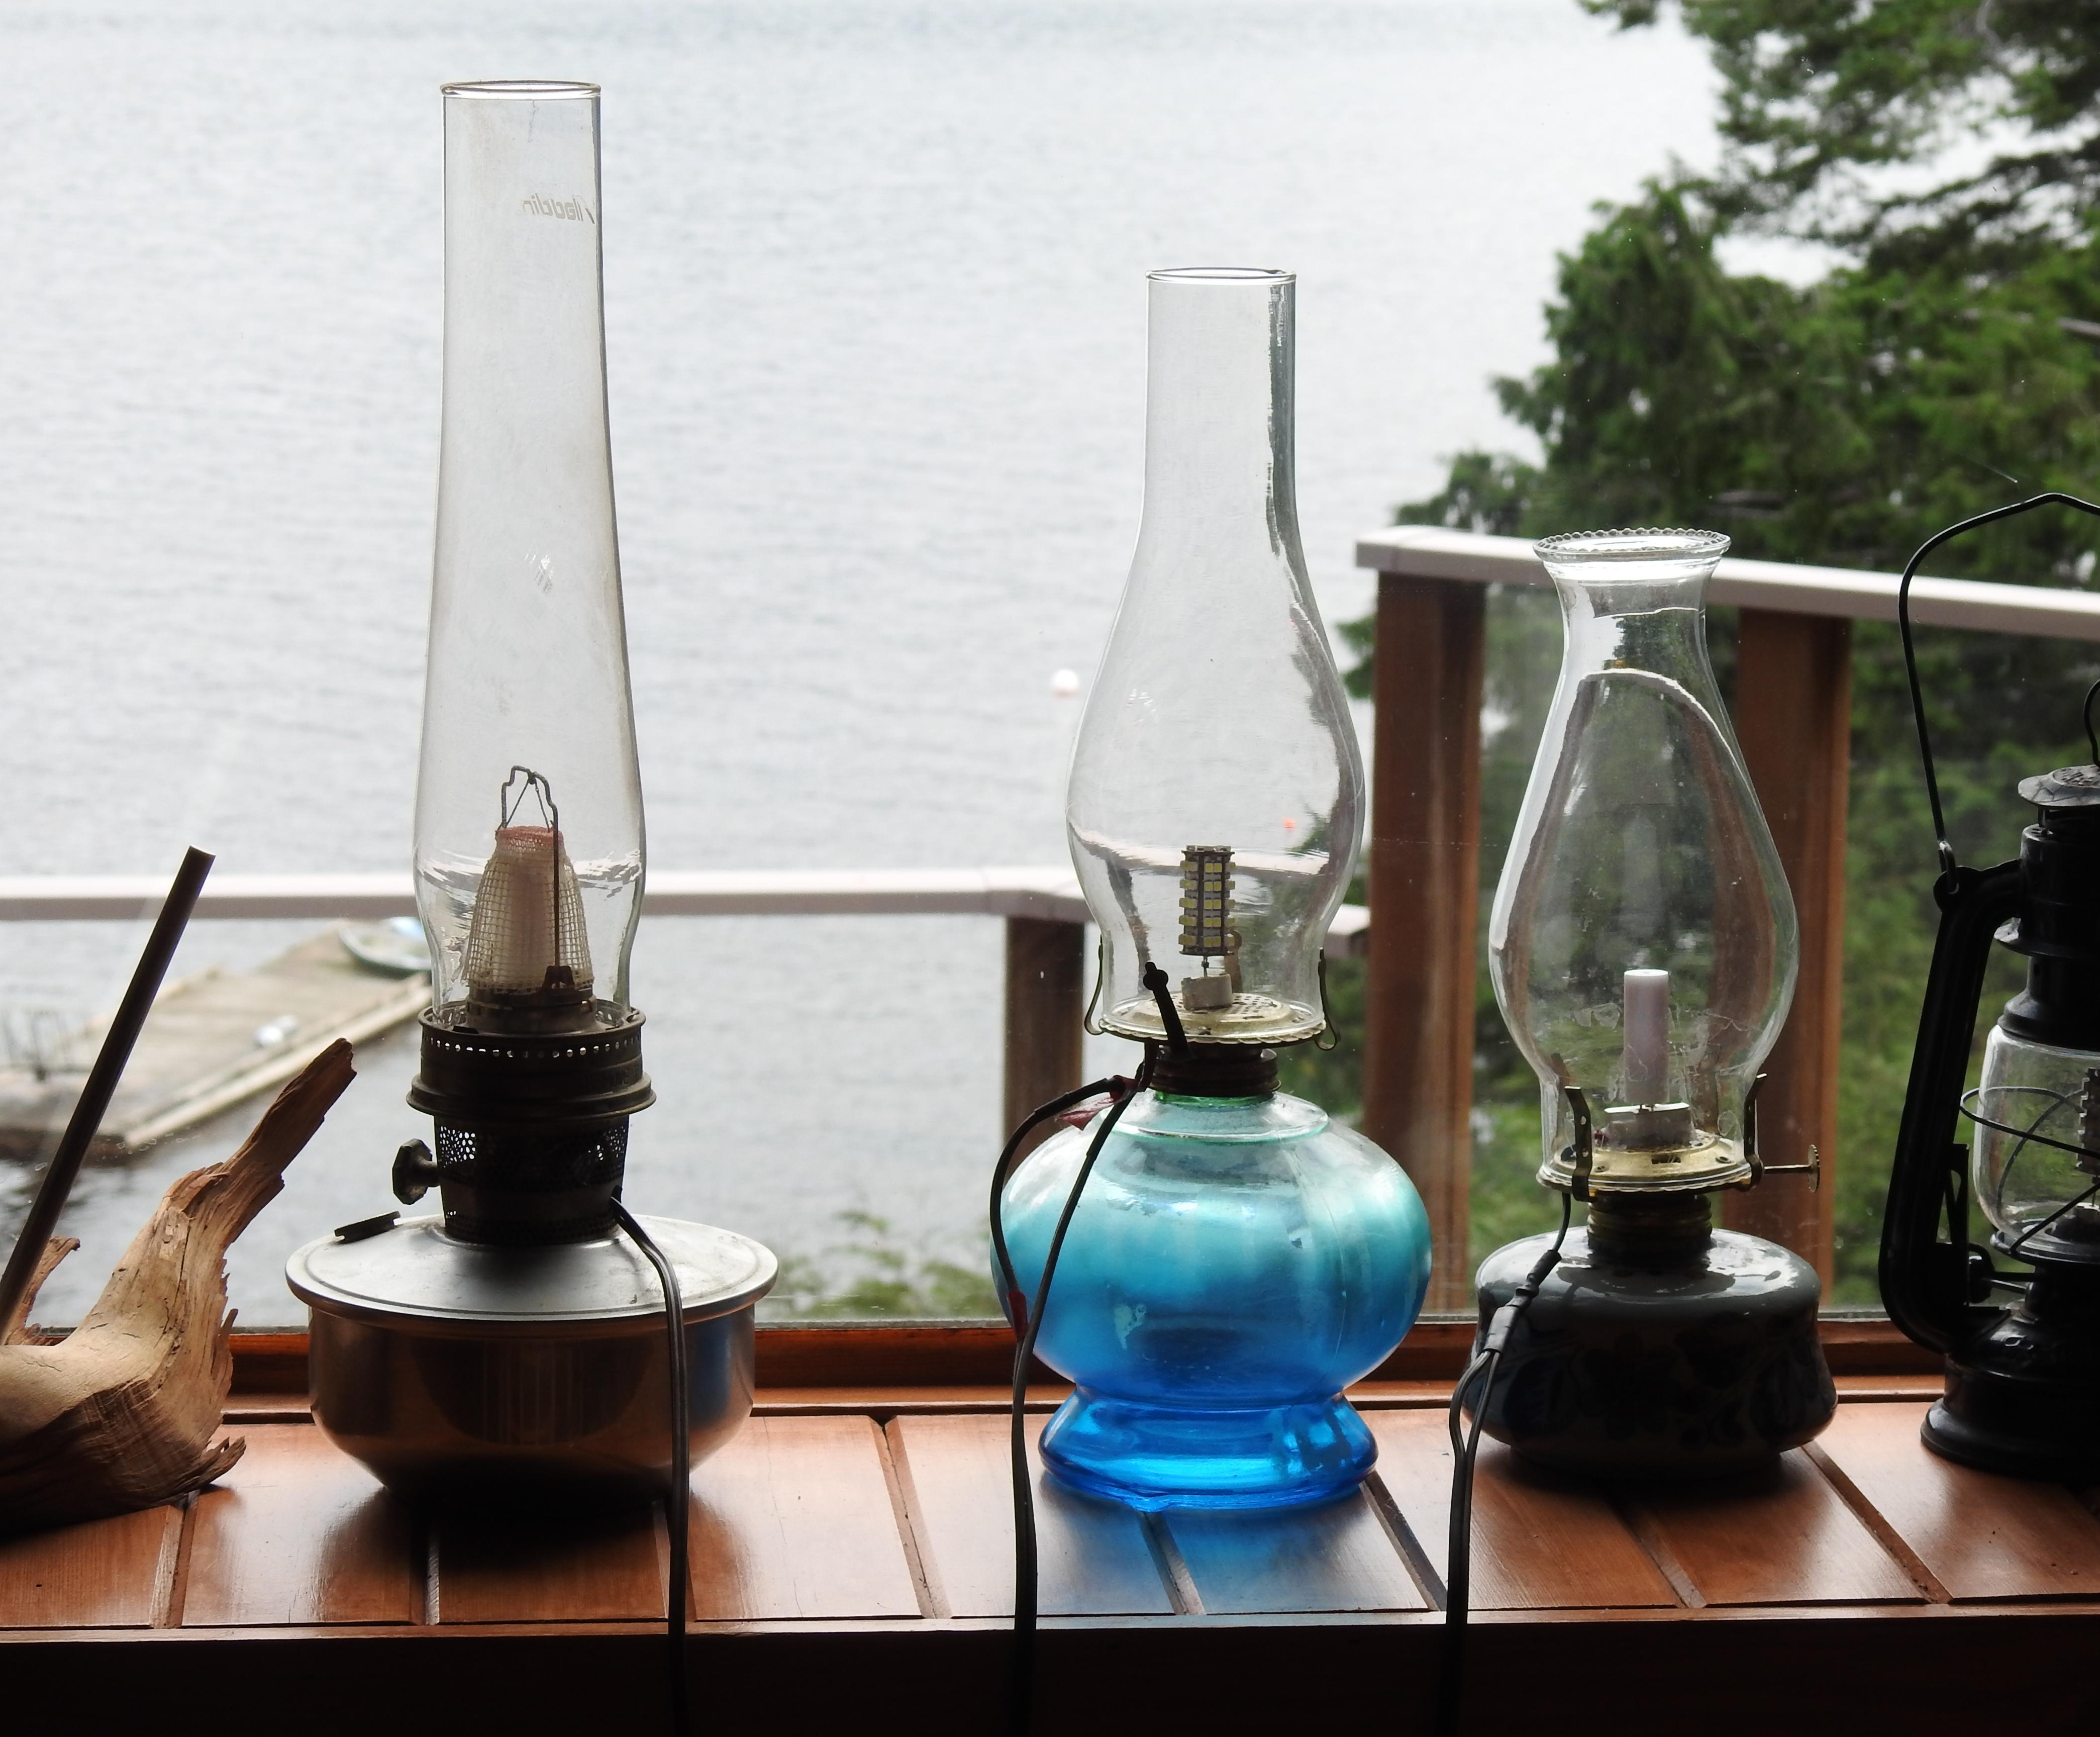 Convert Old Oil Lamps to Electricity